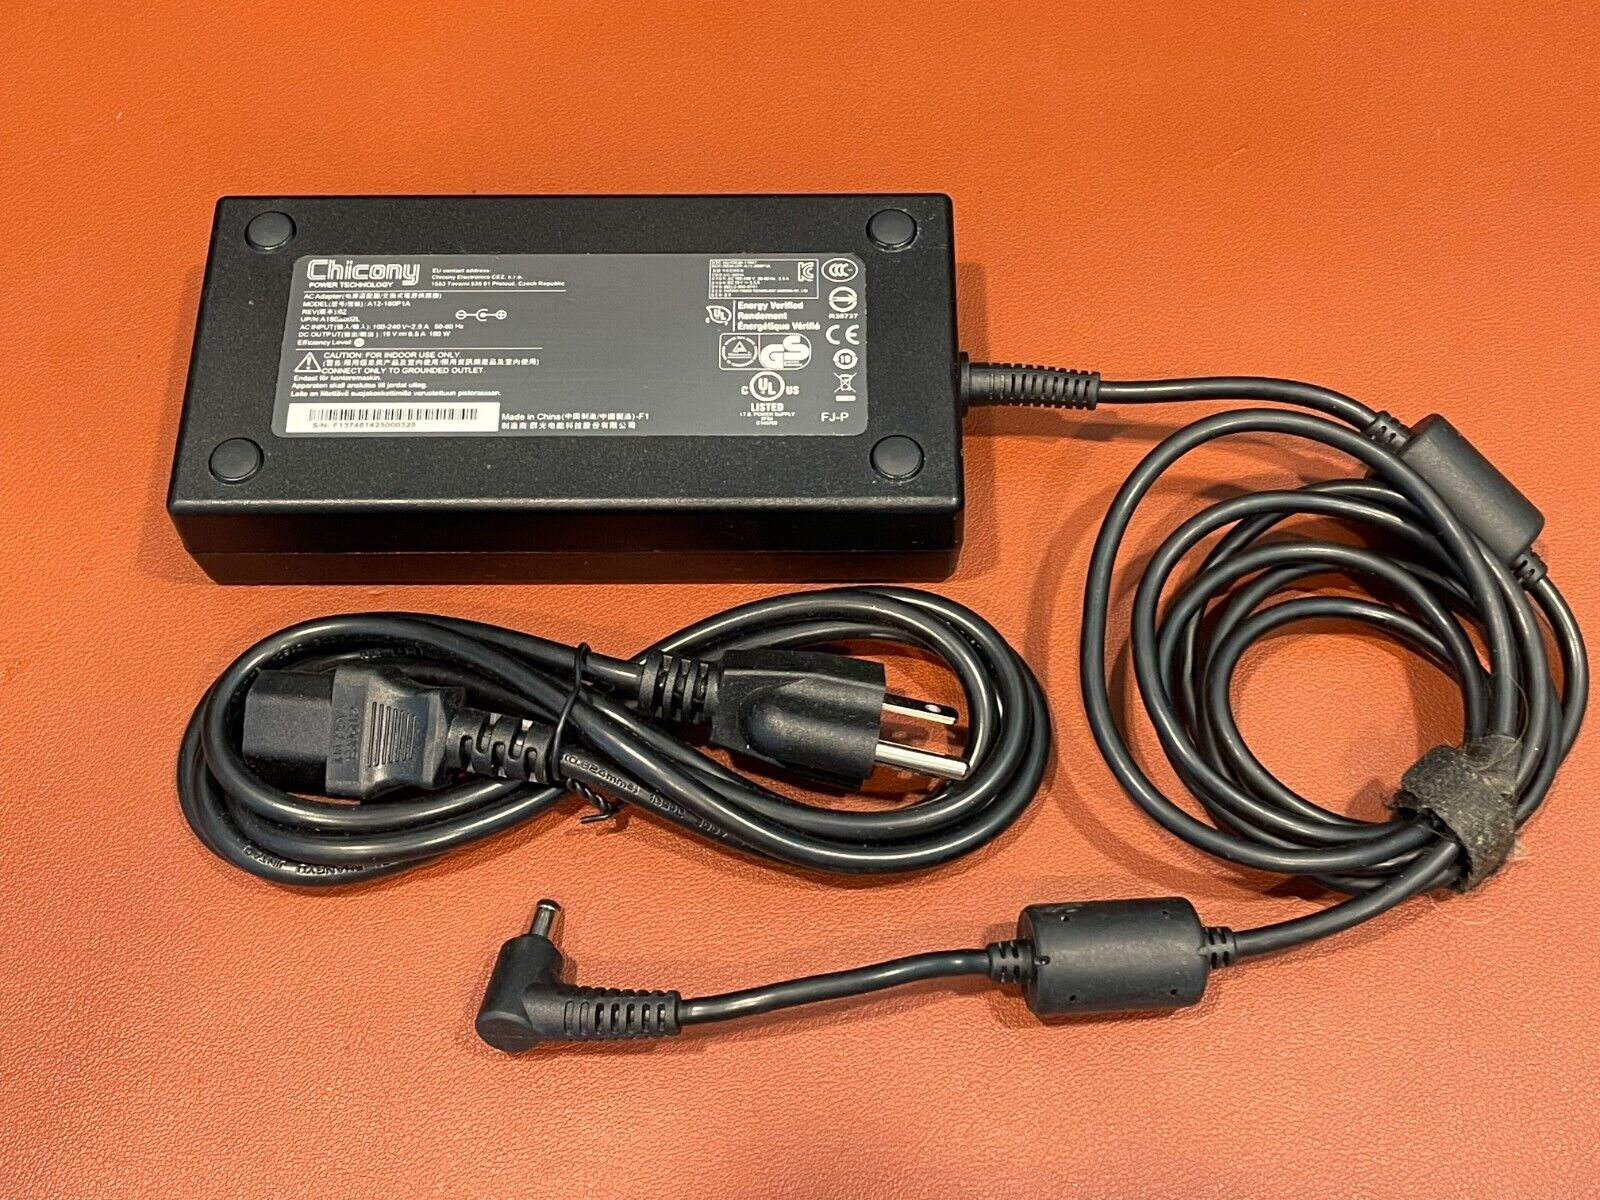 *Brand NEW*Genuine Chicony 180W 19V 9.5A AC Power Adapter For Clevo P651SE A12-180P1A Power Supply